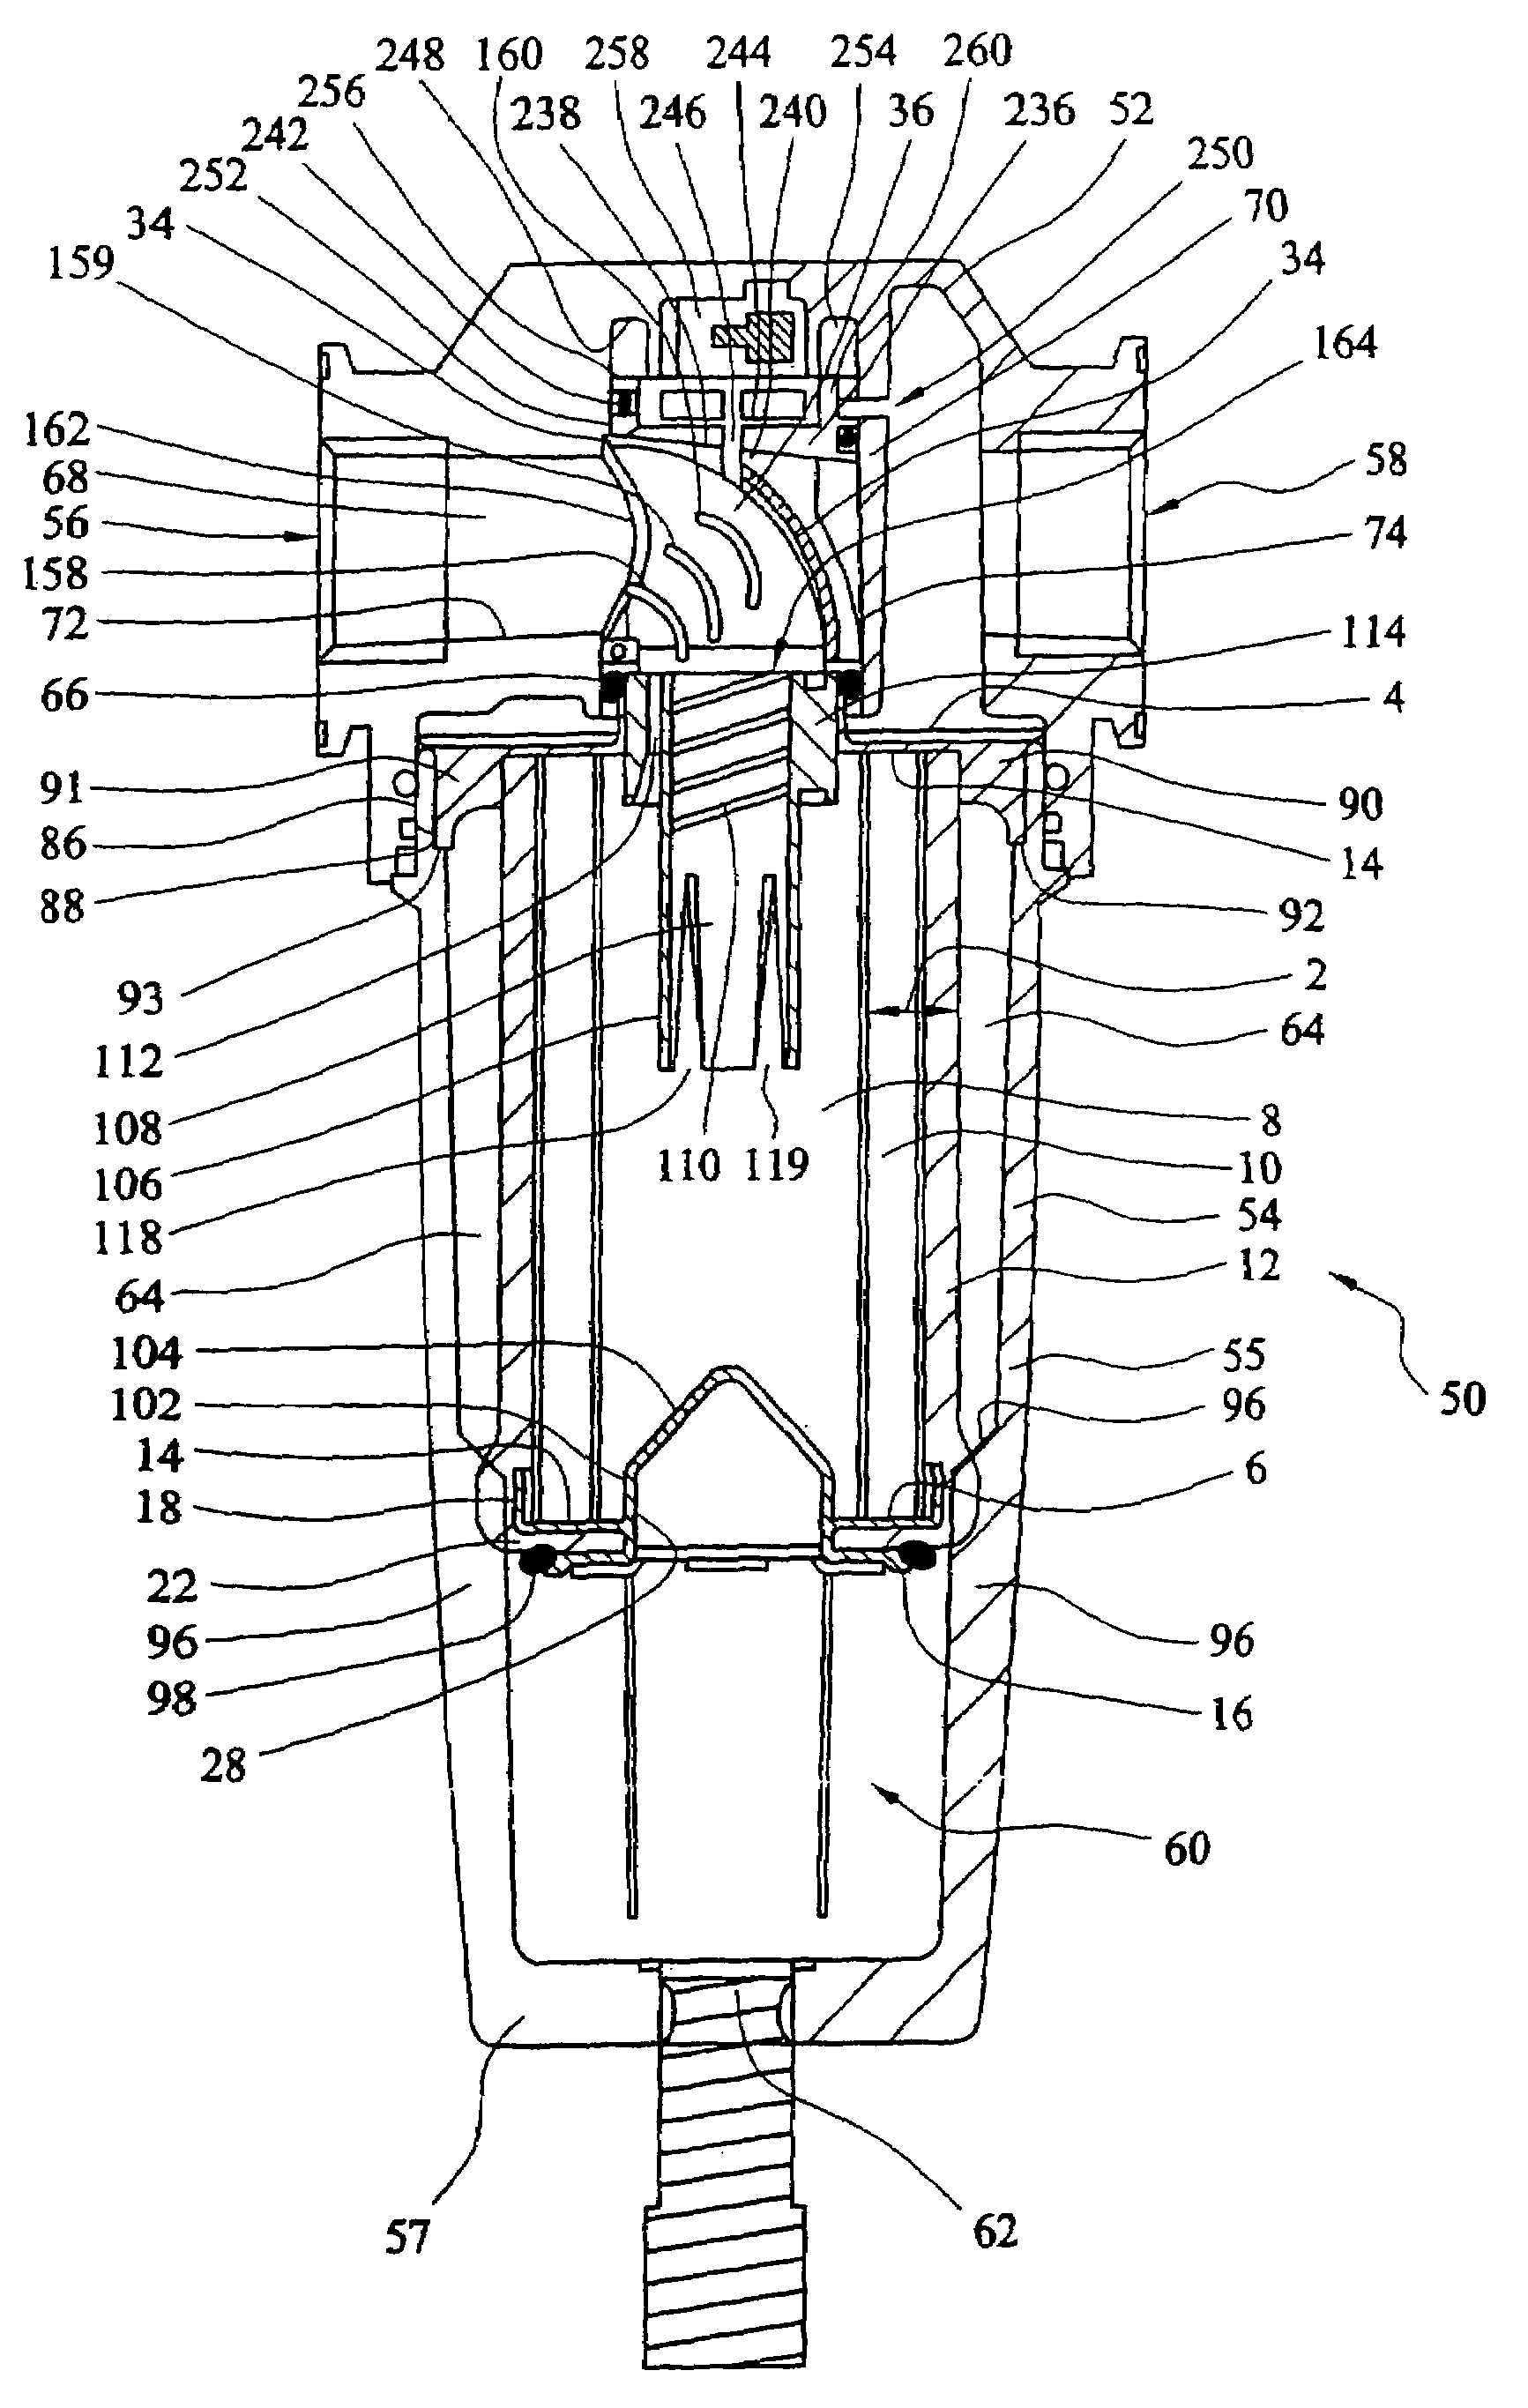 Assembly for collecting material entrained in a gas stream